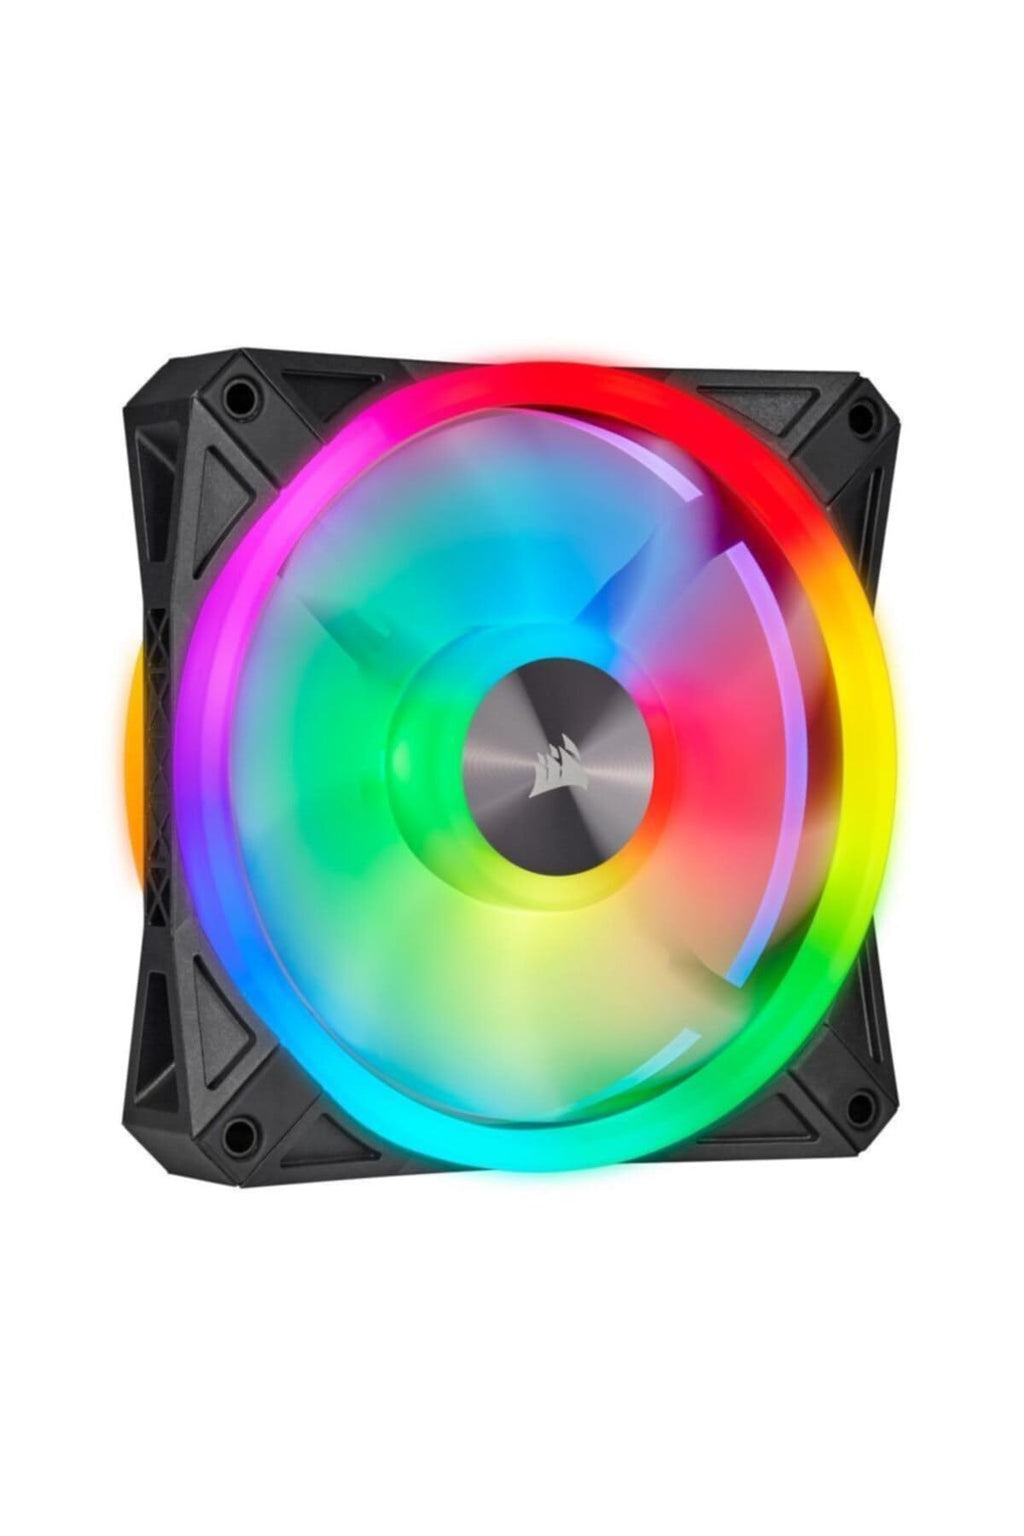  [AUSTRALIA] - Corsair iCUE QL120 RGB, 120 mm RGB LED PWM fan (34 individually controllable RGB LEDs, speeds up to 1,500 rpm, low noise) single pack - black